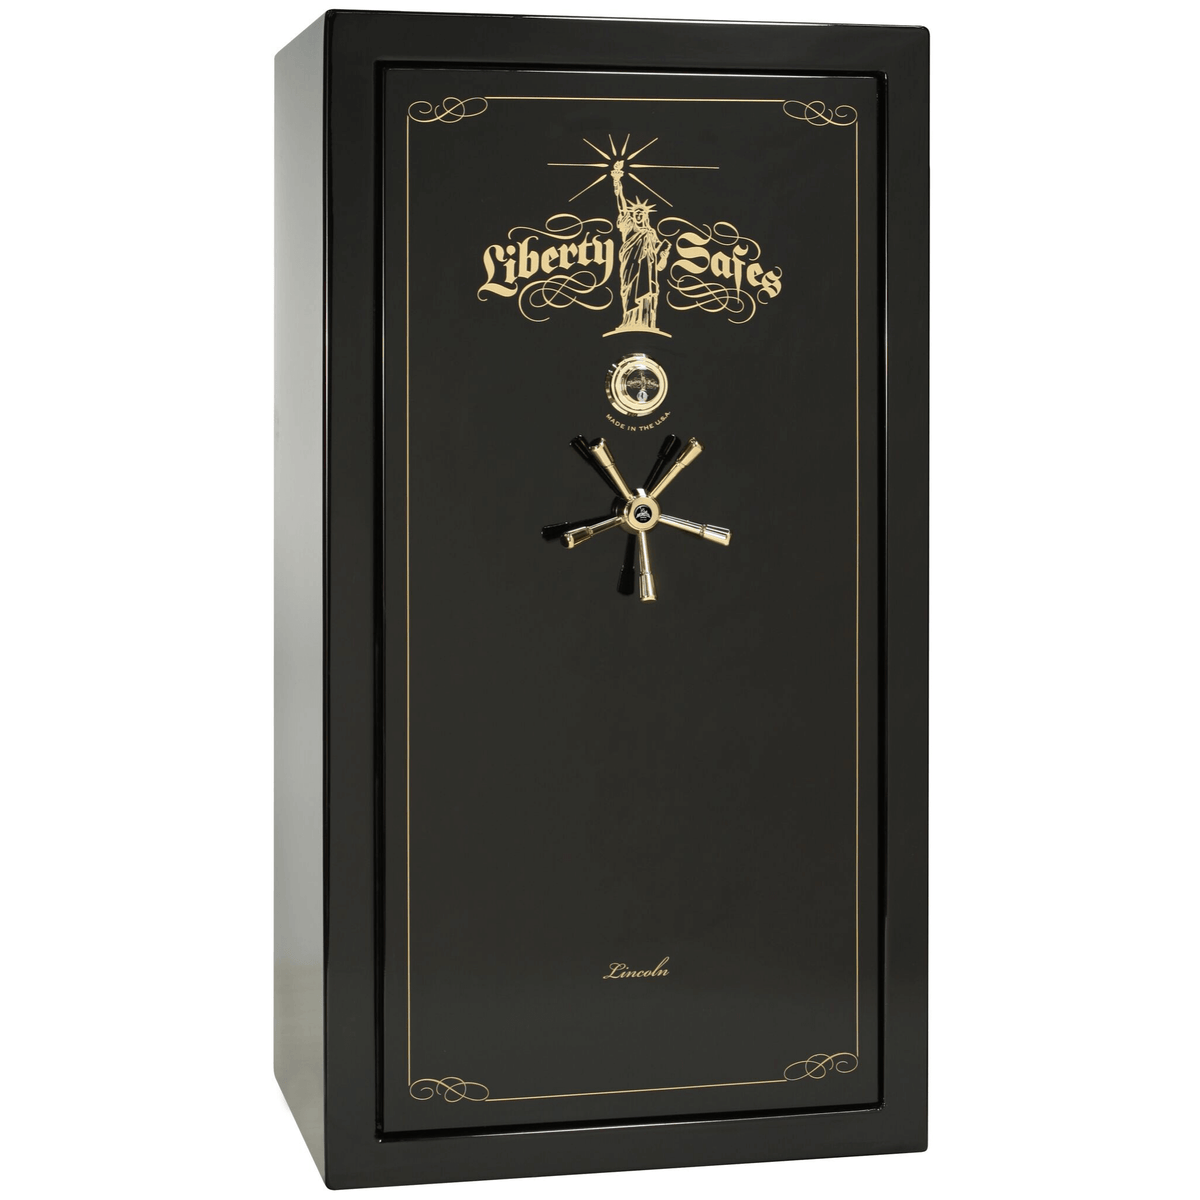 Liberty Lincoln 40 Safe in Black Gloss with Brass Mechanical Lock.